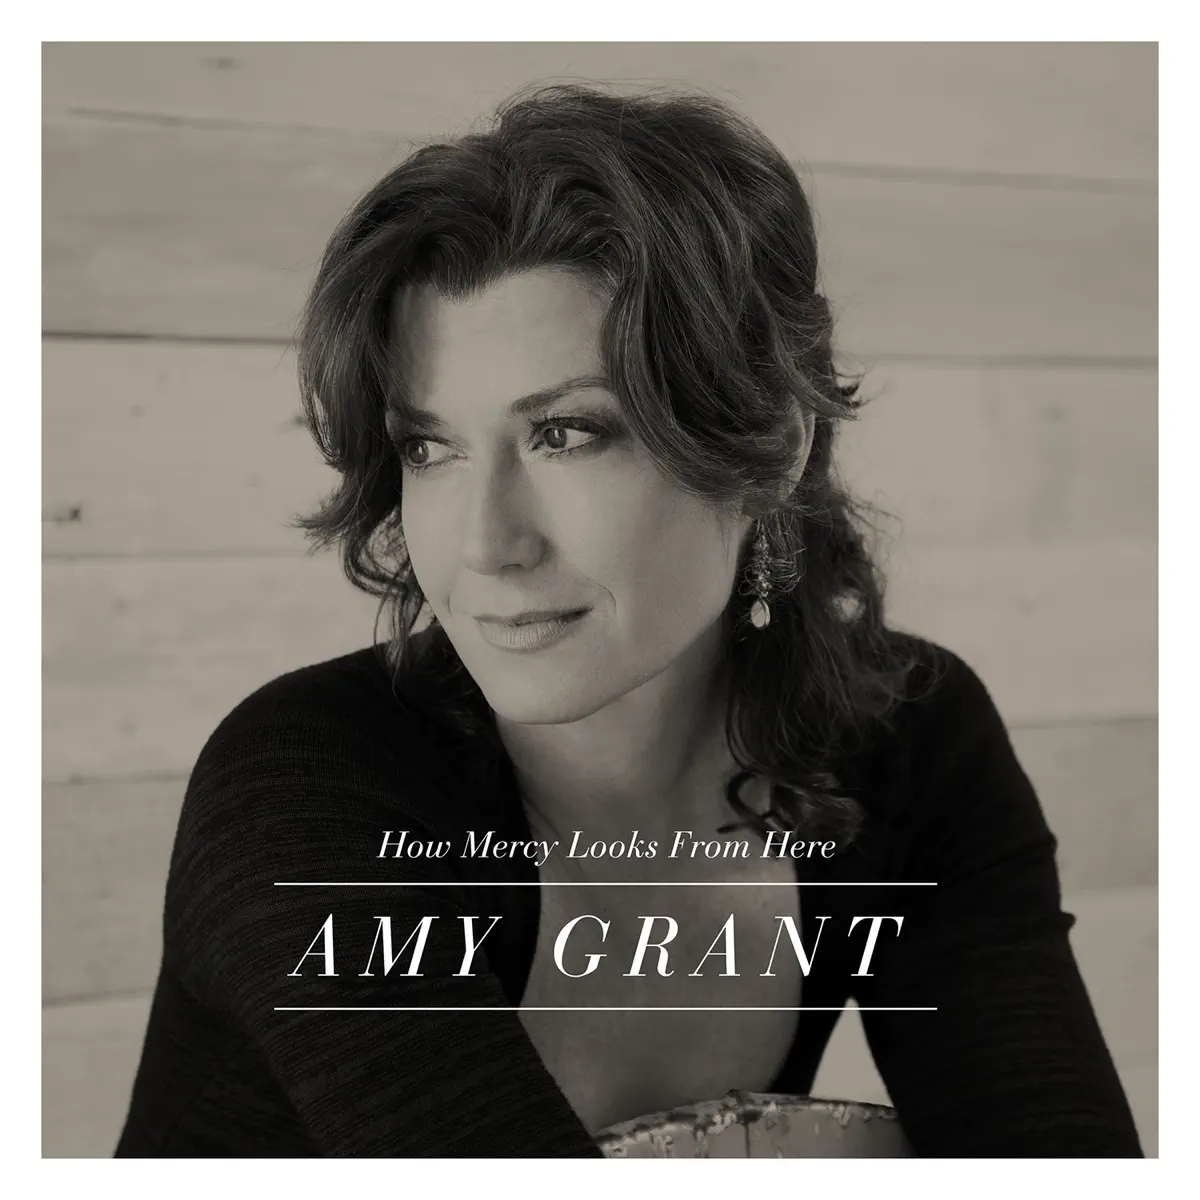 Amy Grant - How Mercy Looks from Here (Deluxe Edition) (2013) [iTunes Plus AAC M4A]-新房子